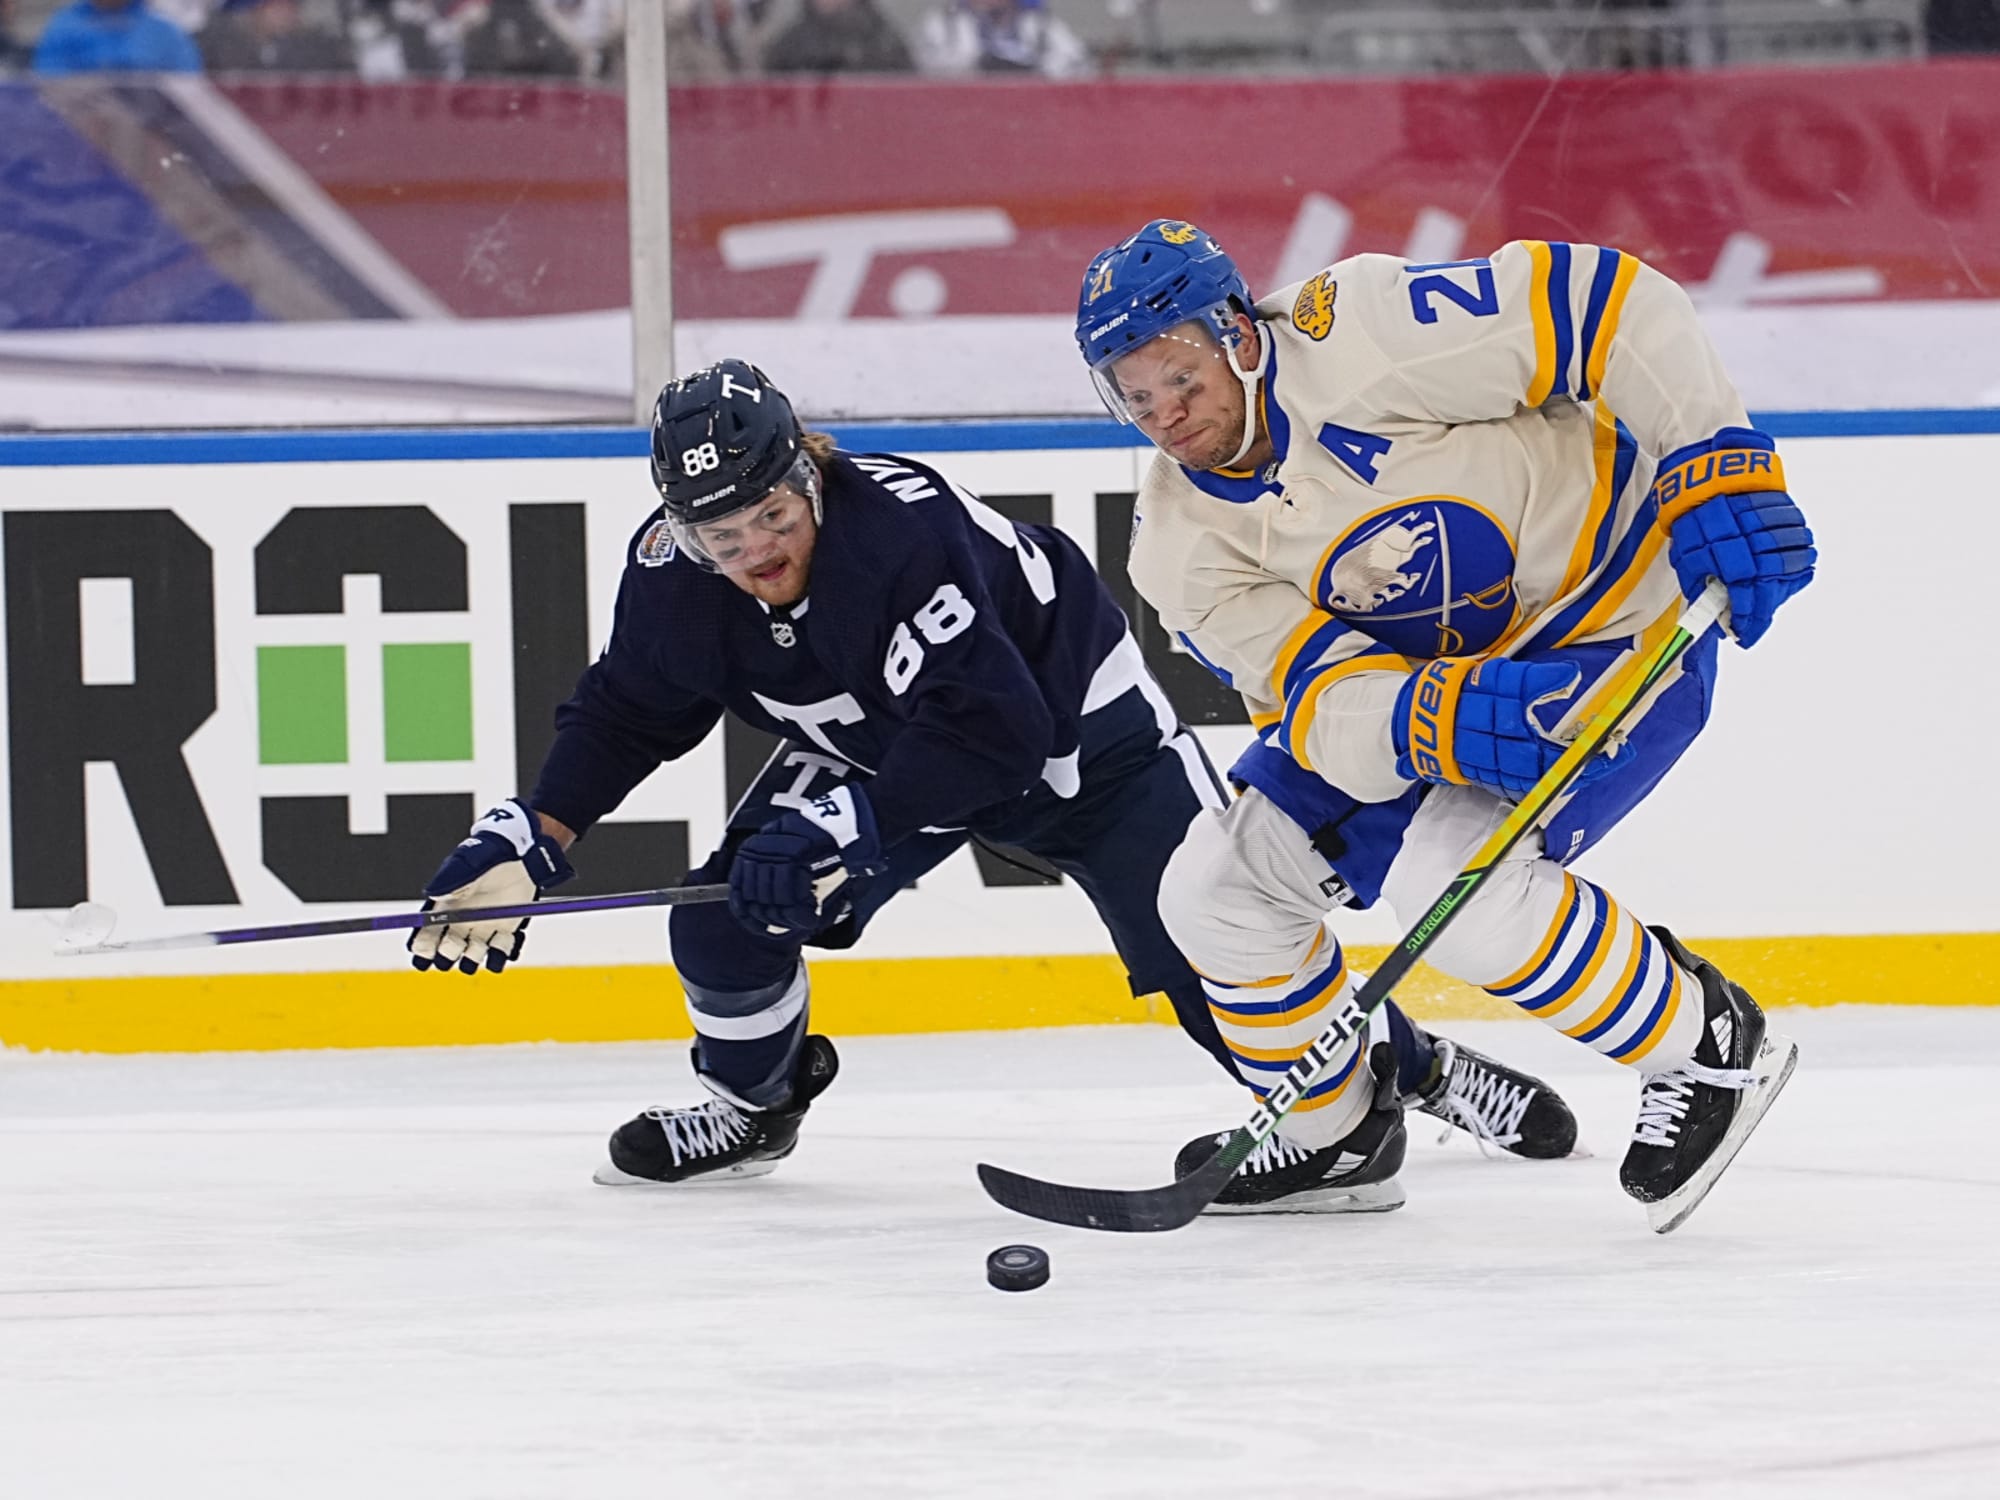 Hamilton: Sabres won the day at Heritage Classic